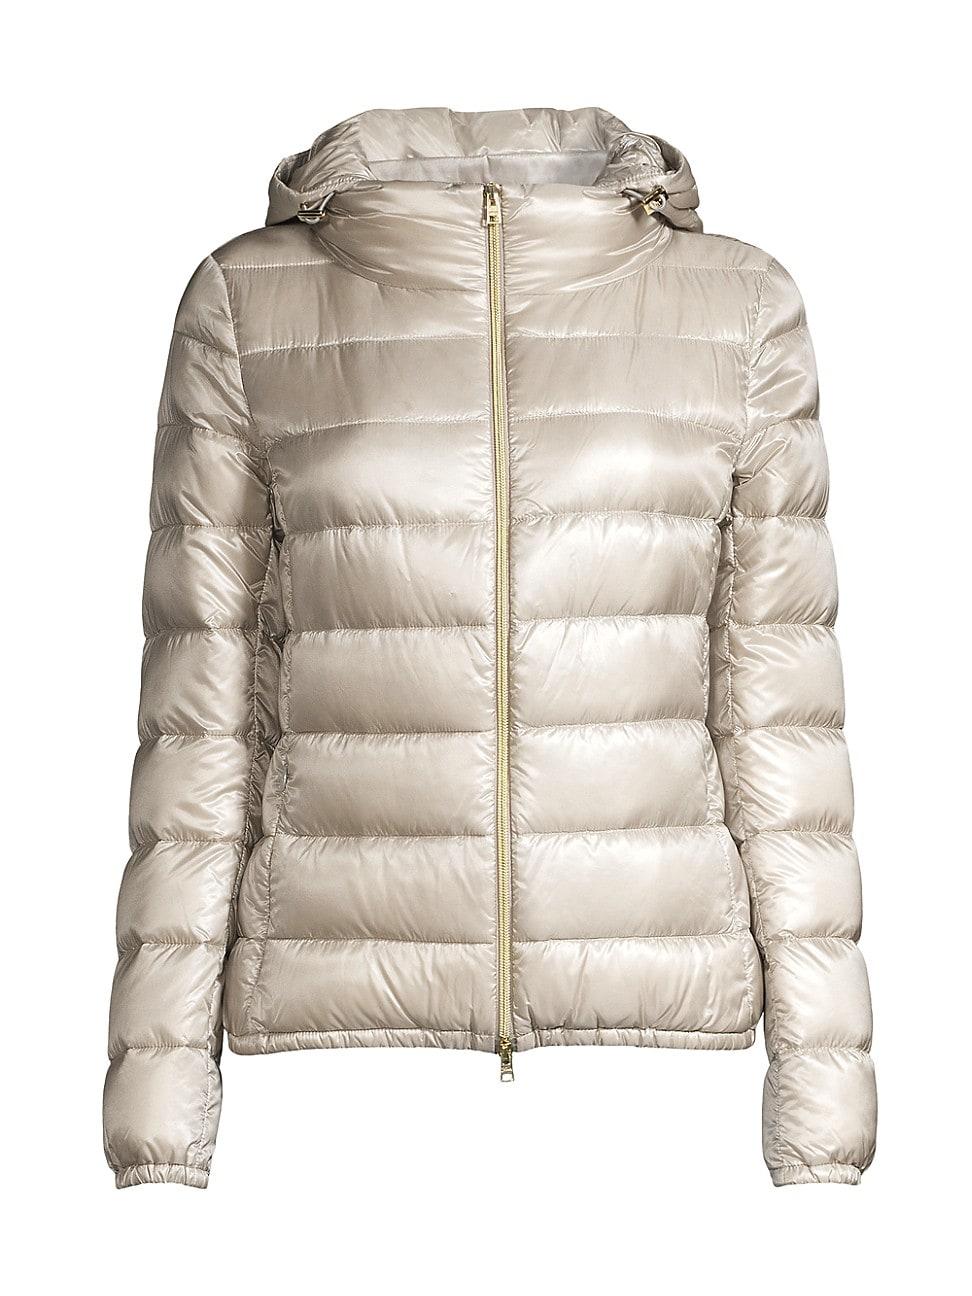 Herno Giada Hooded Down Jacket in Natural | Lyst